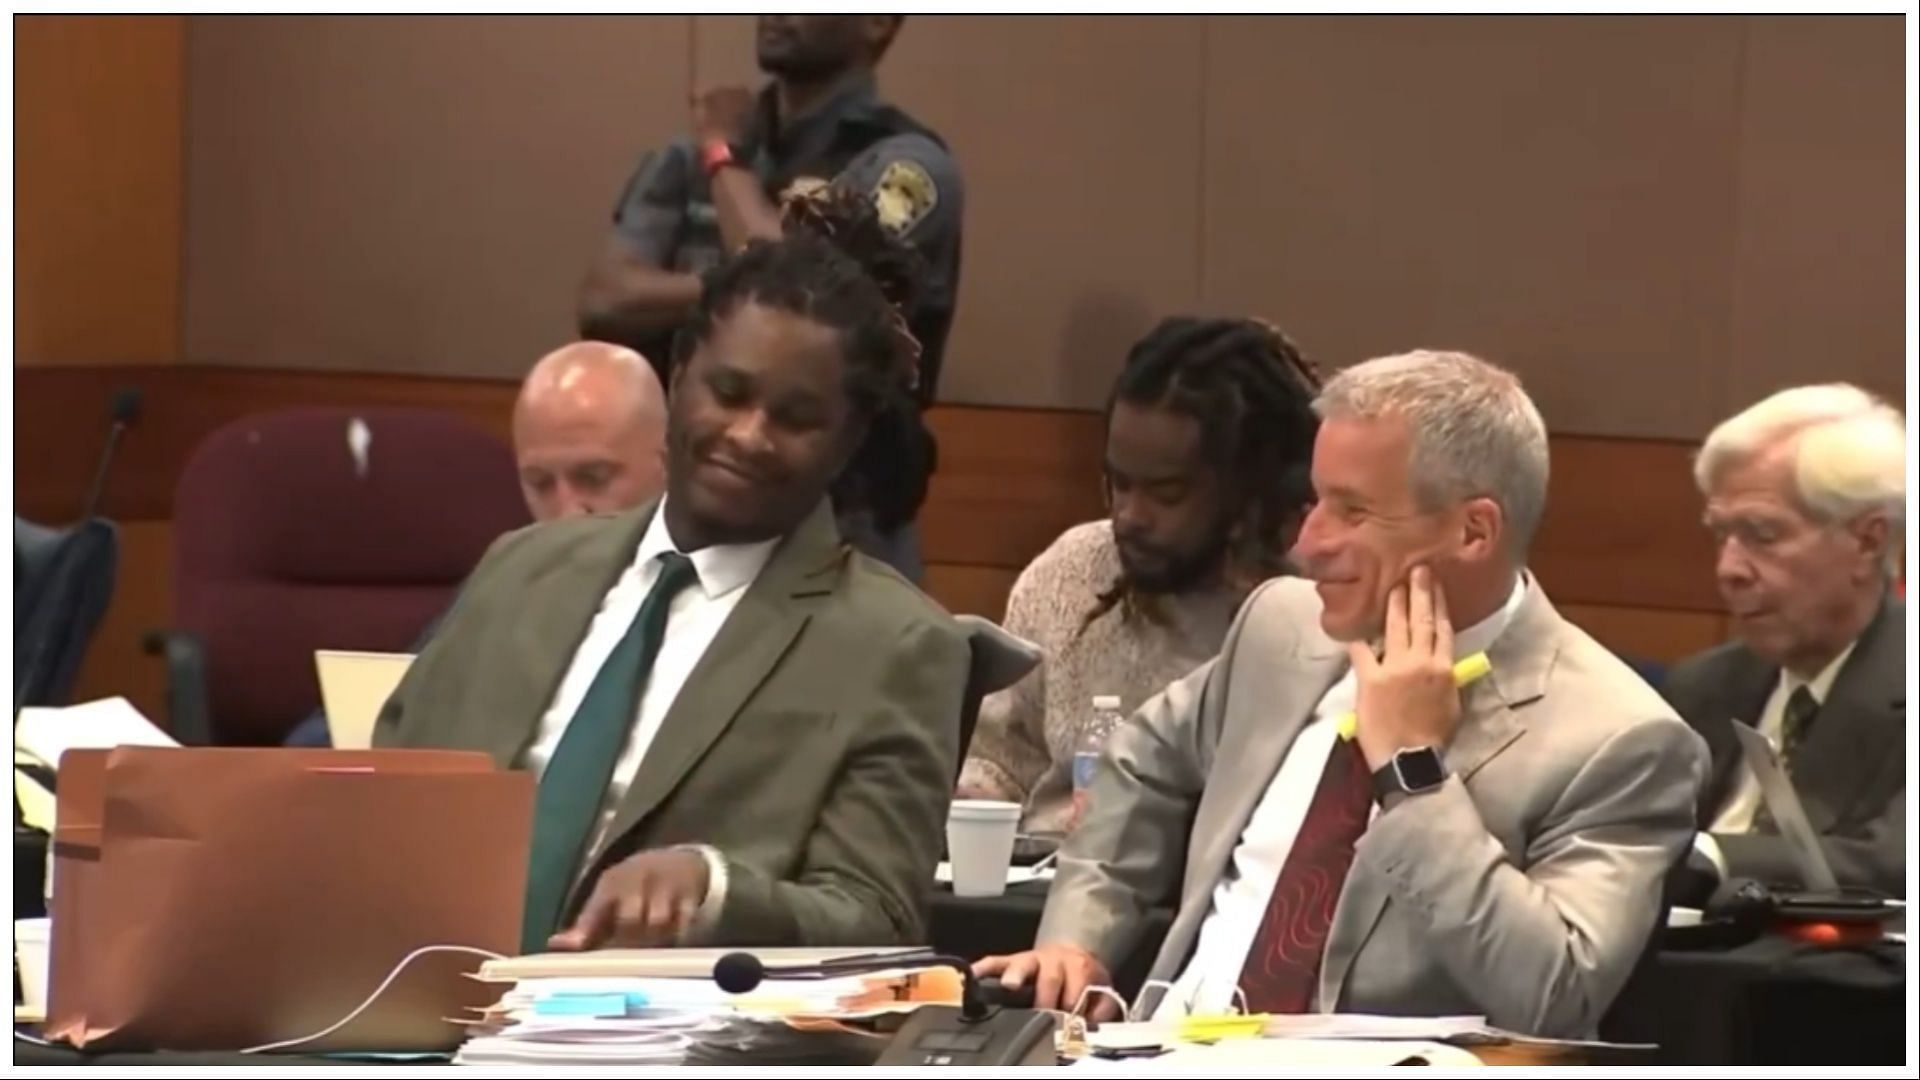 Young Thug vibing on his own song in court, (Image via Debating Hip-Hop/X)